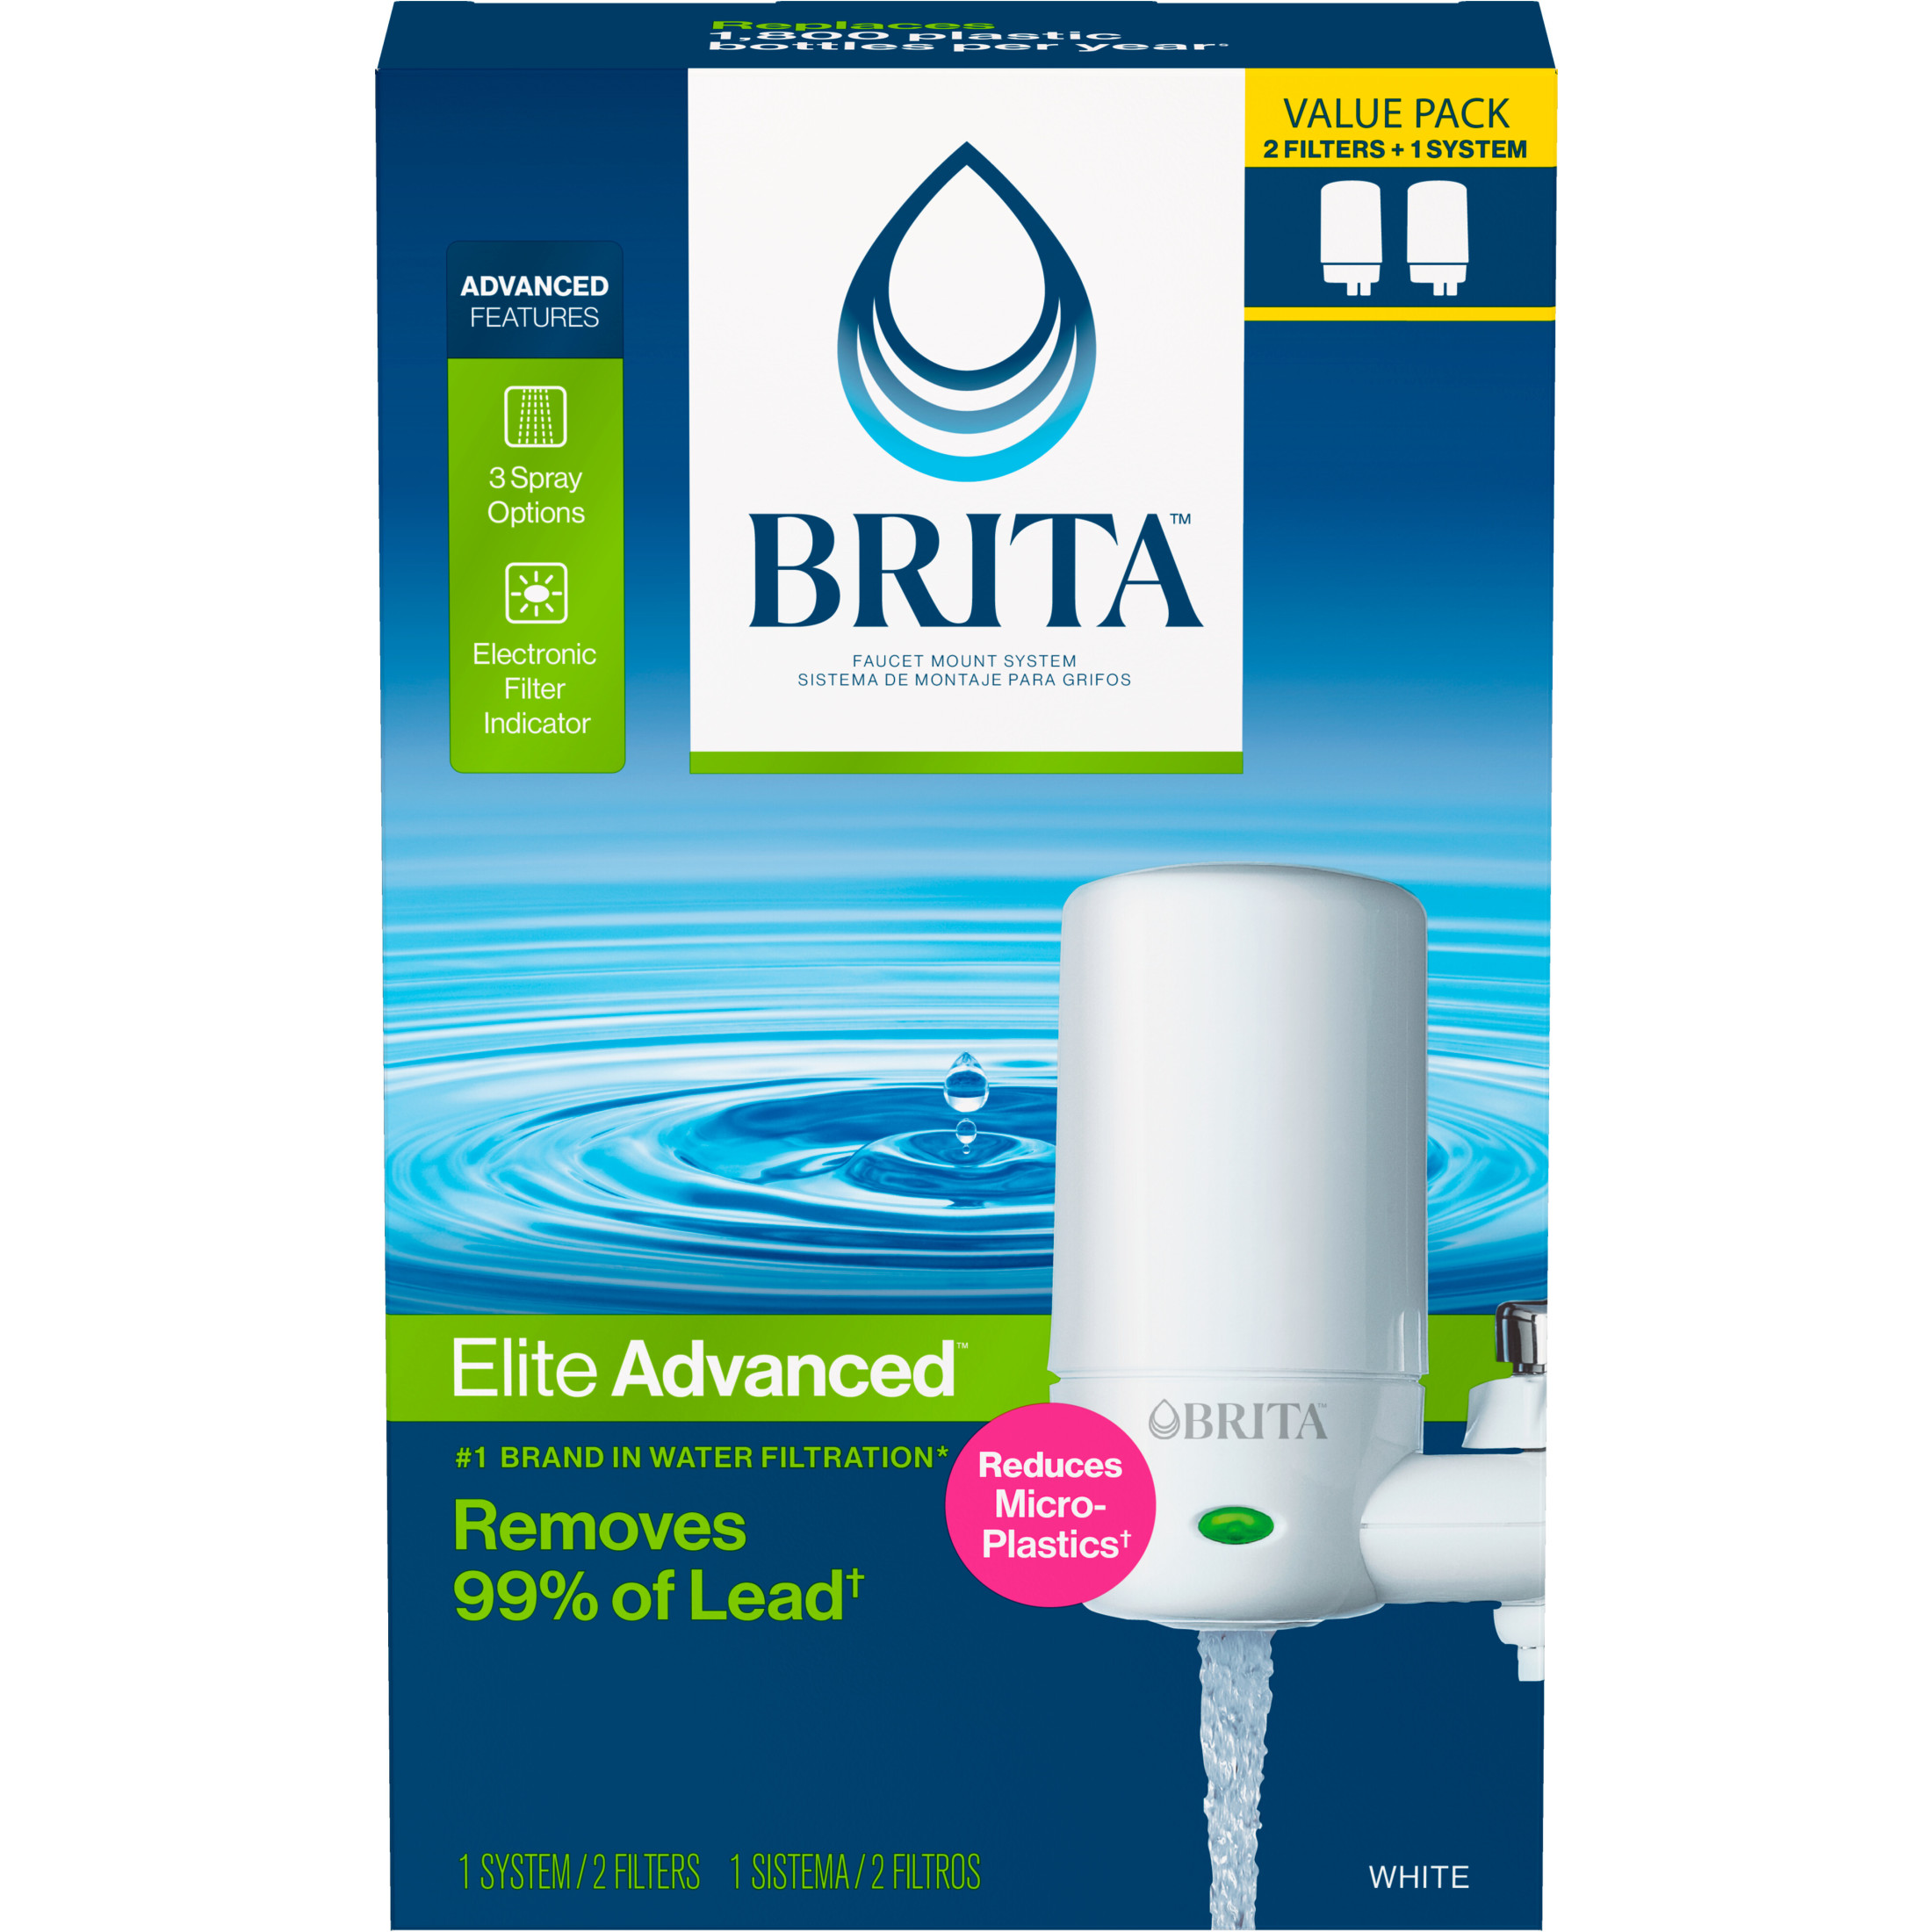 Brita Elite Water Faucet Filtration Mount System, Fits Standard Faucets, White, Includes 2 Filters - image 2 of 8